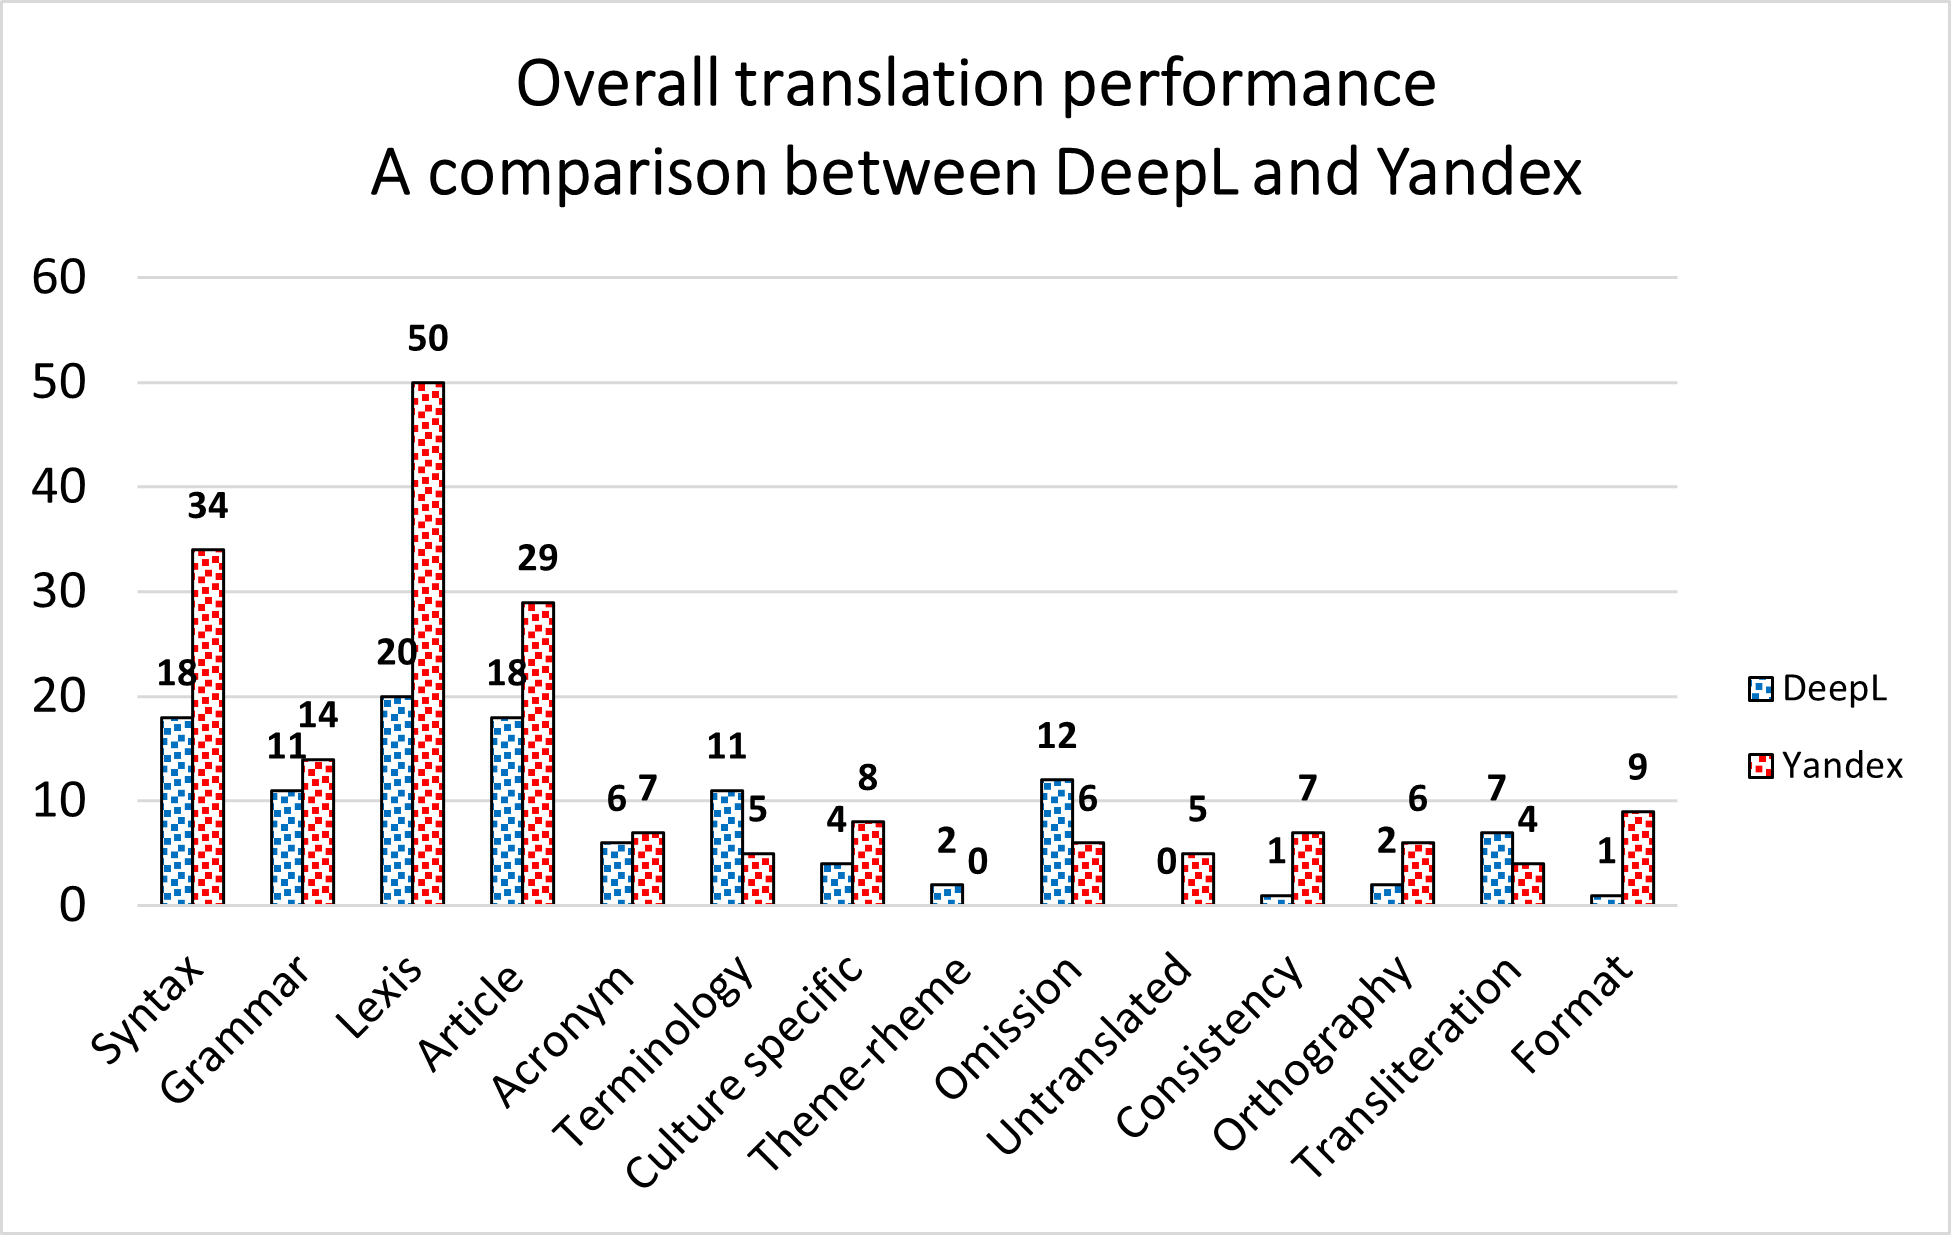 A comparison between DeepL and Yandex regarding the overall translation performance